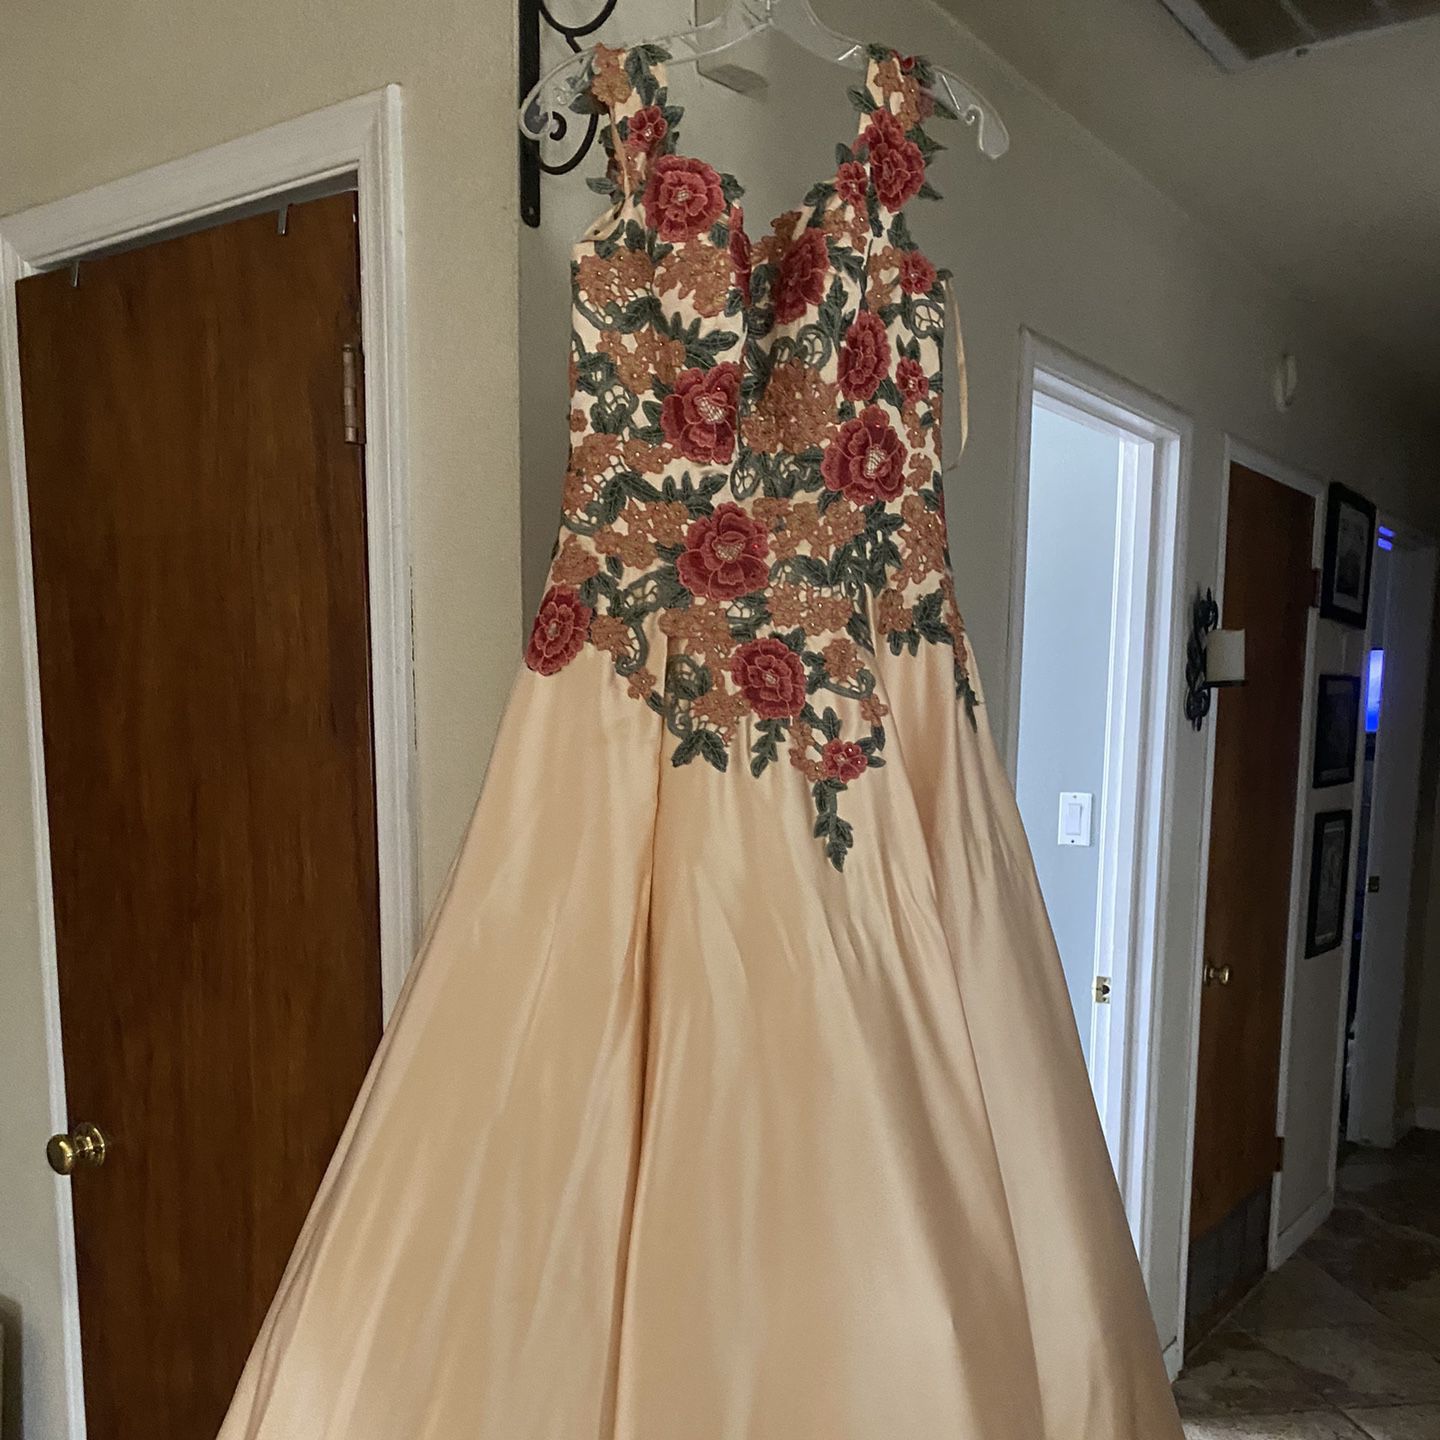 Beige Prom Dress With Flower Detailing 